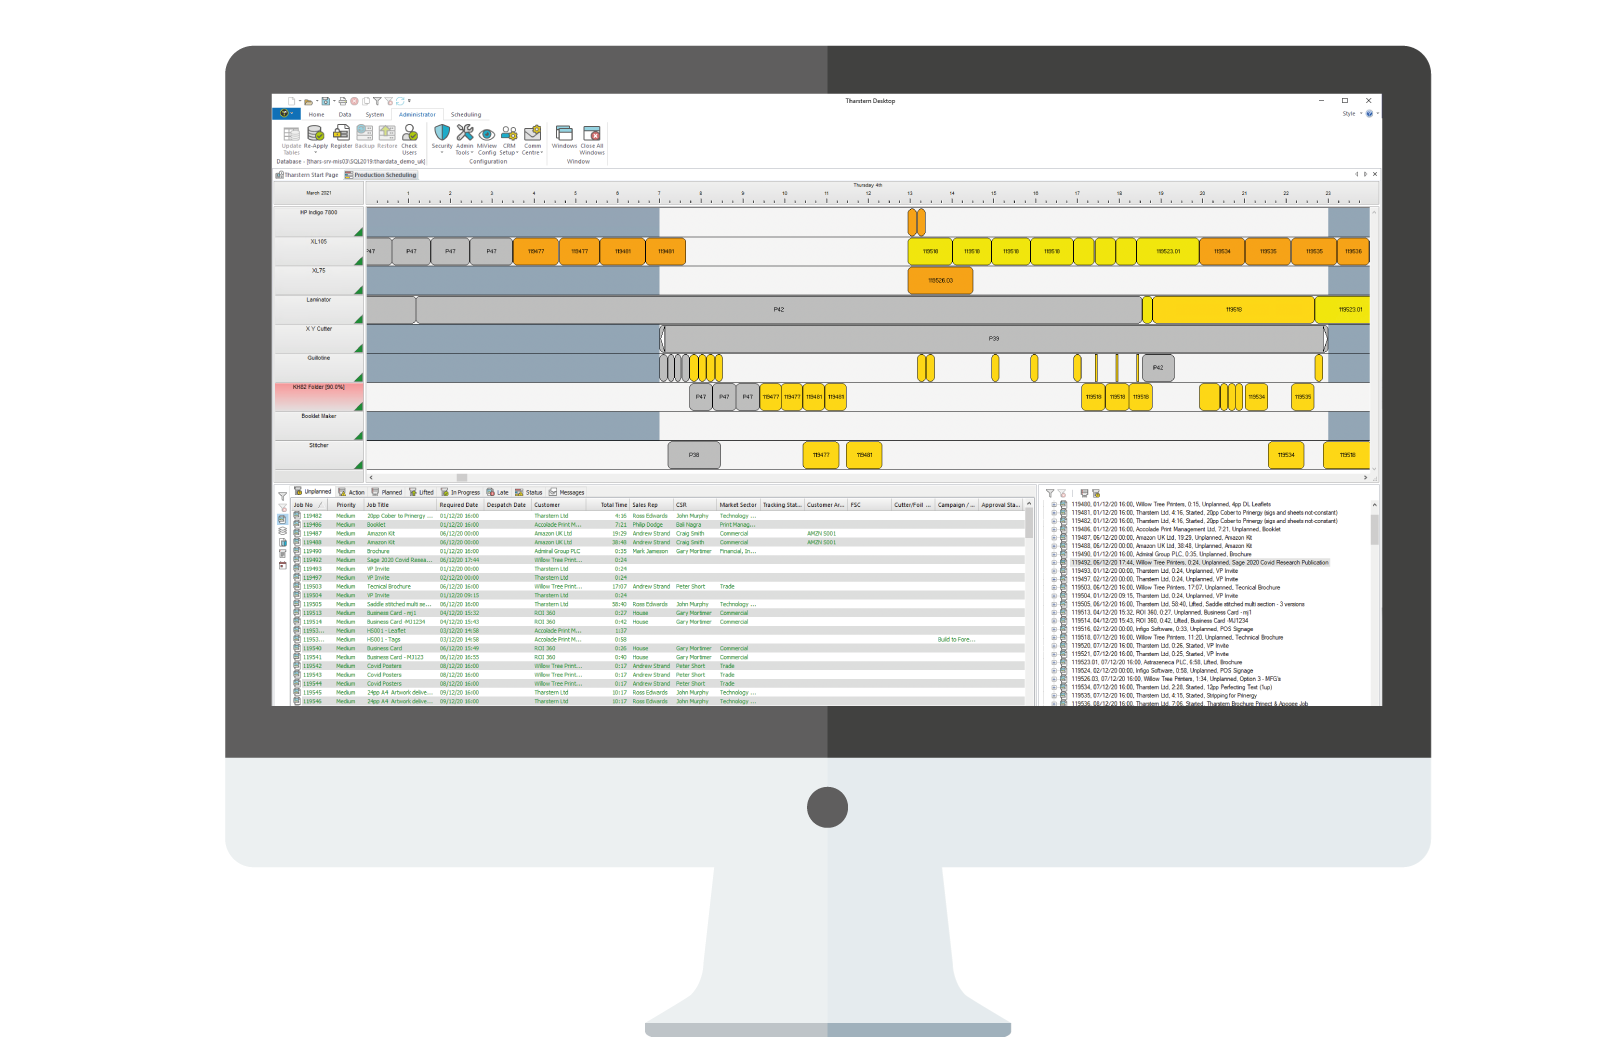 Get full control of production schedules throughout your workflow, allowing your team to manage delivery deadlines, optimize capacity and react to ever-changing demands and priorities.